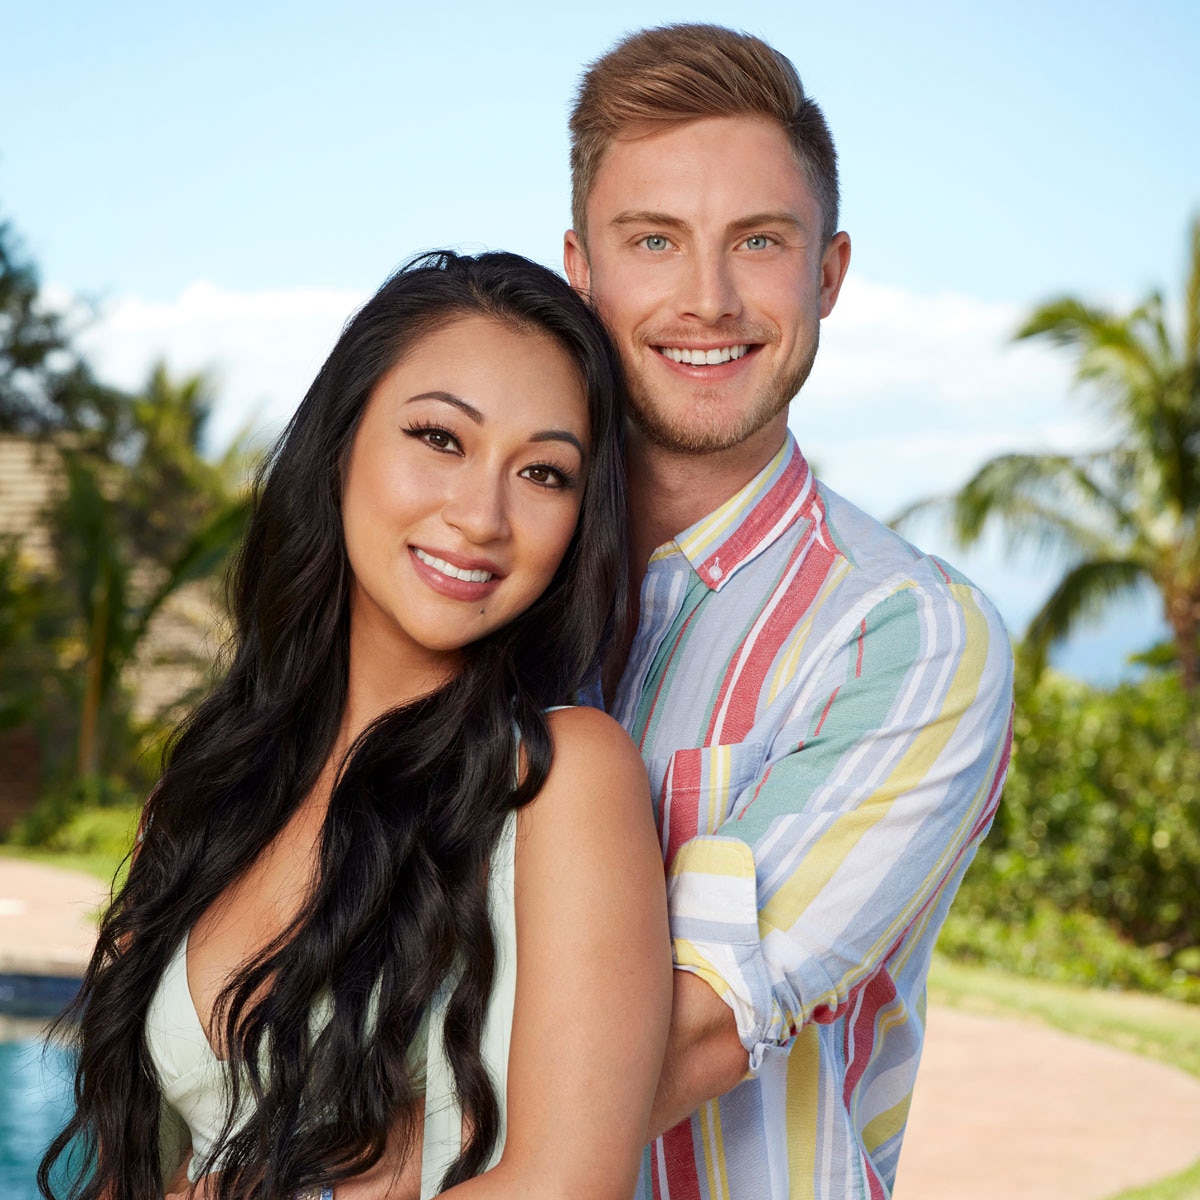 Meet the Couples and Sexy Singles of Temptation Island Season 4